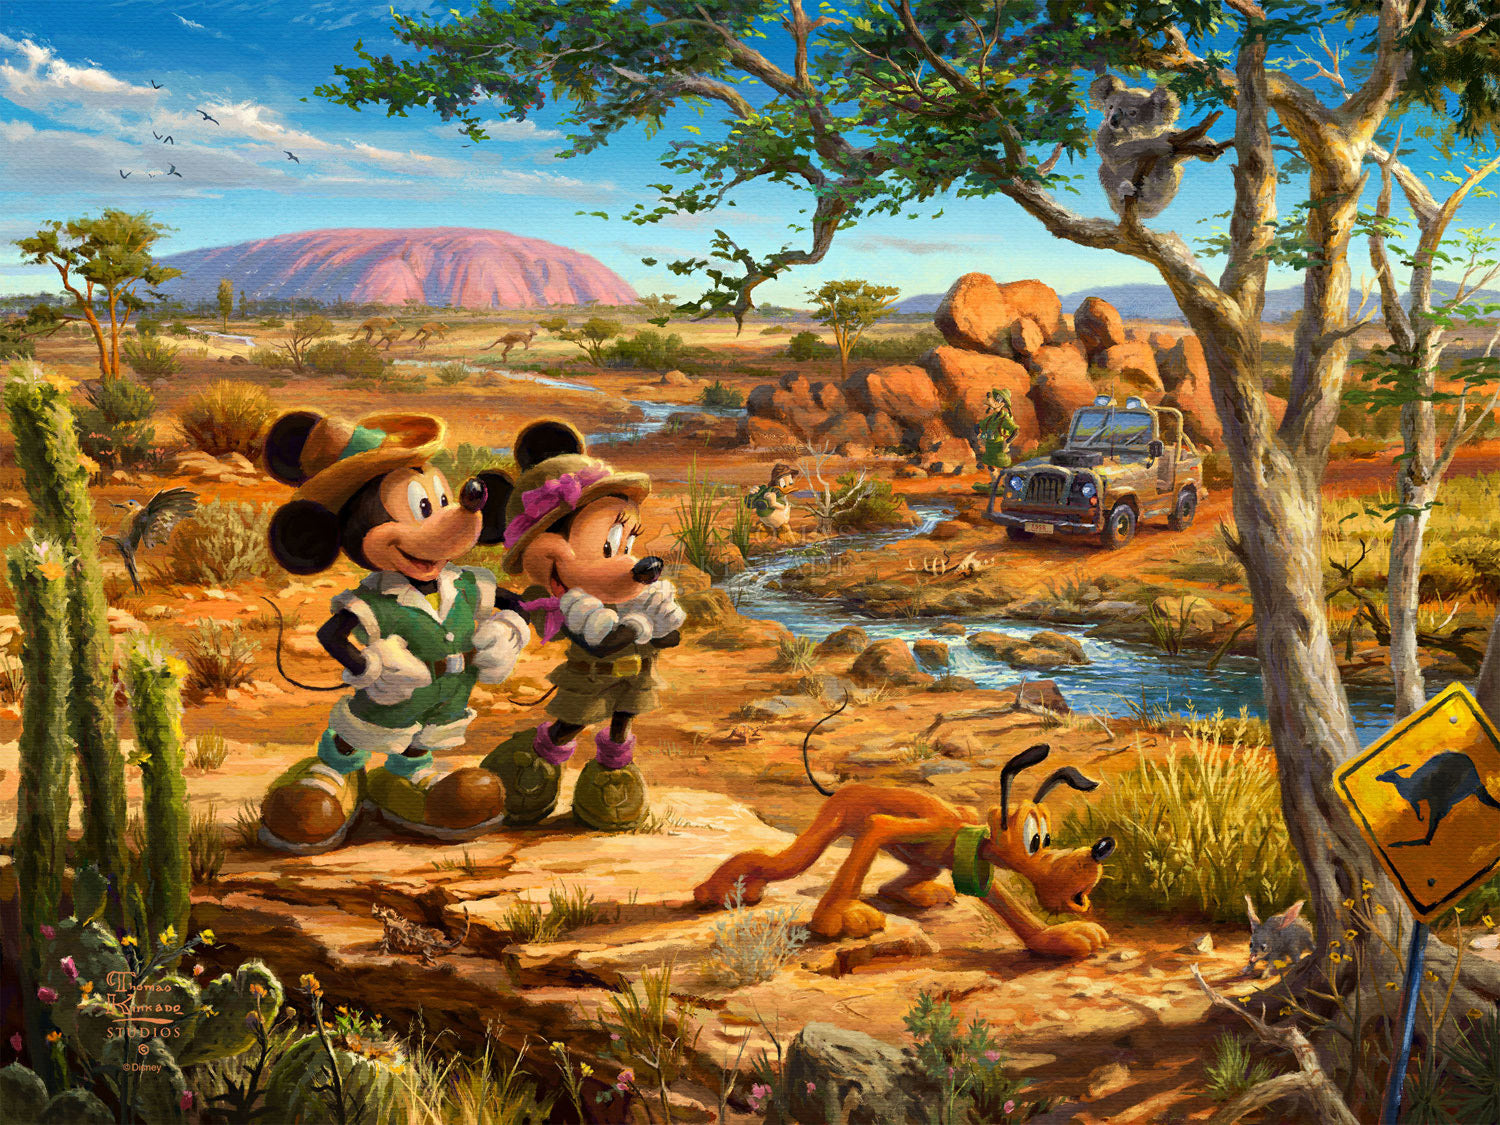 Thomas Kinkade Studios "Mickey and Minnie in the Outback" Limited and Open Canvas Giclee